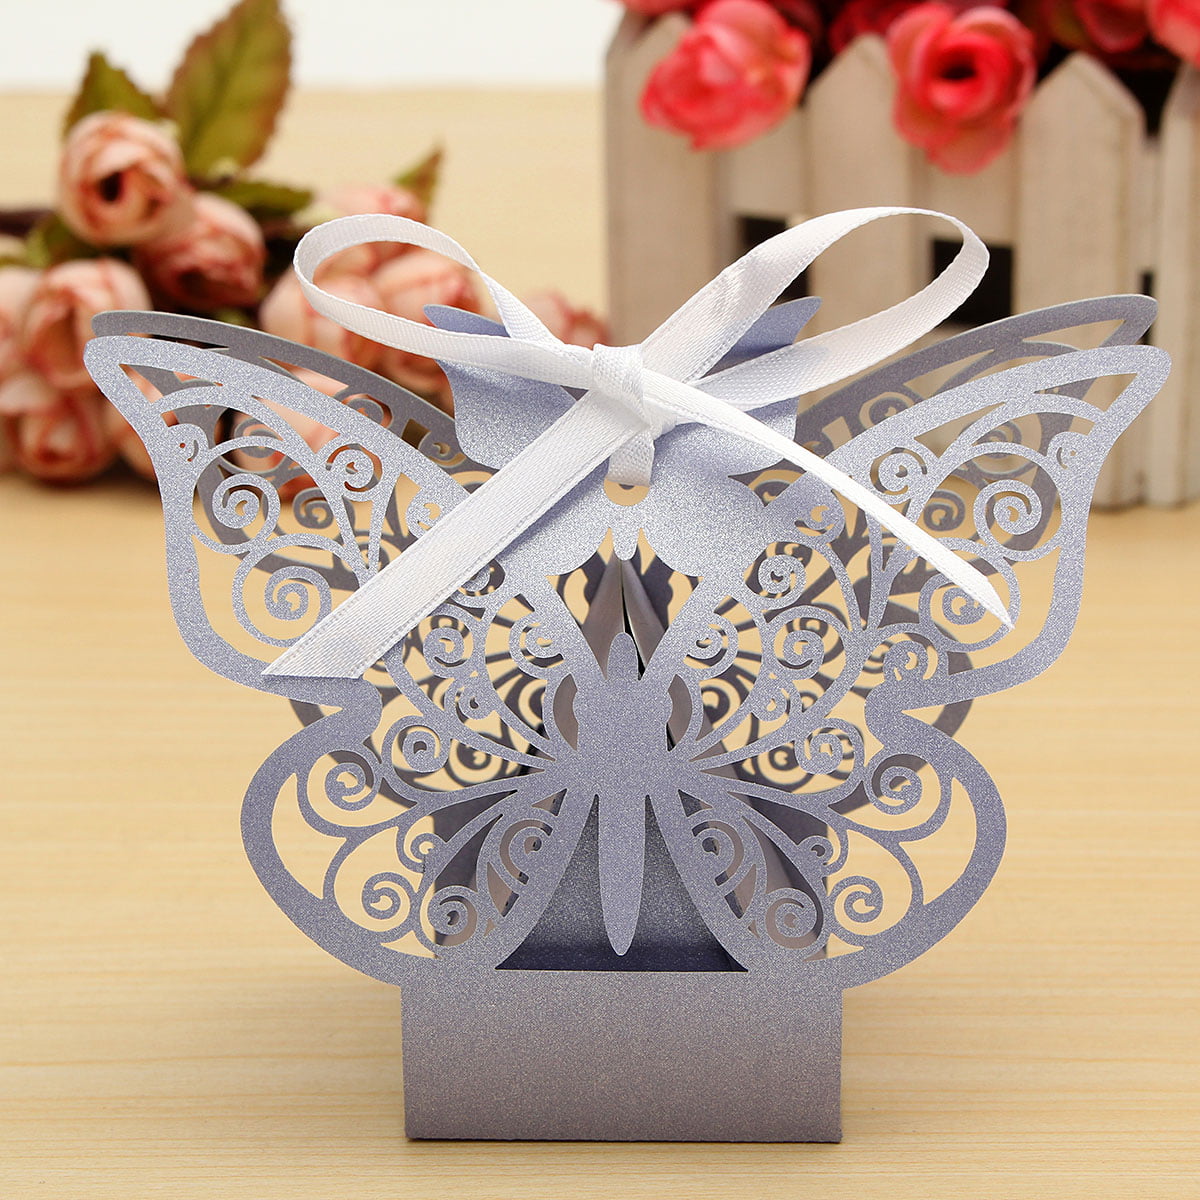 10Pcs Paper Butterfly Cut Candy Cake Boxes Wedding Party Gifts Decor Favor Cases